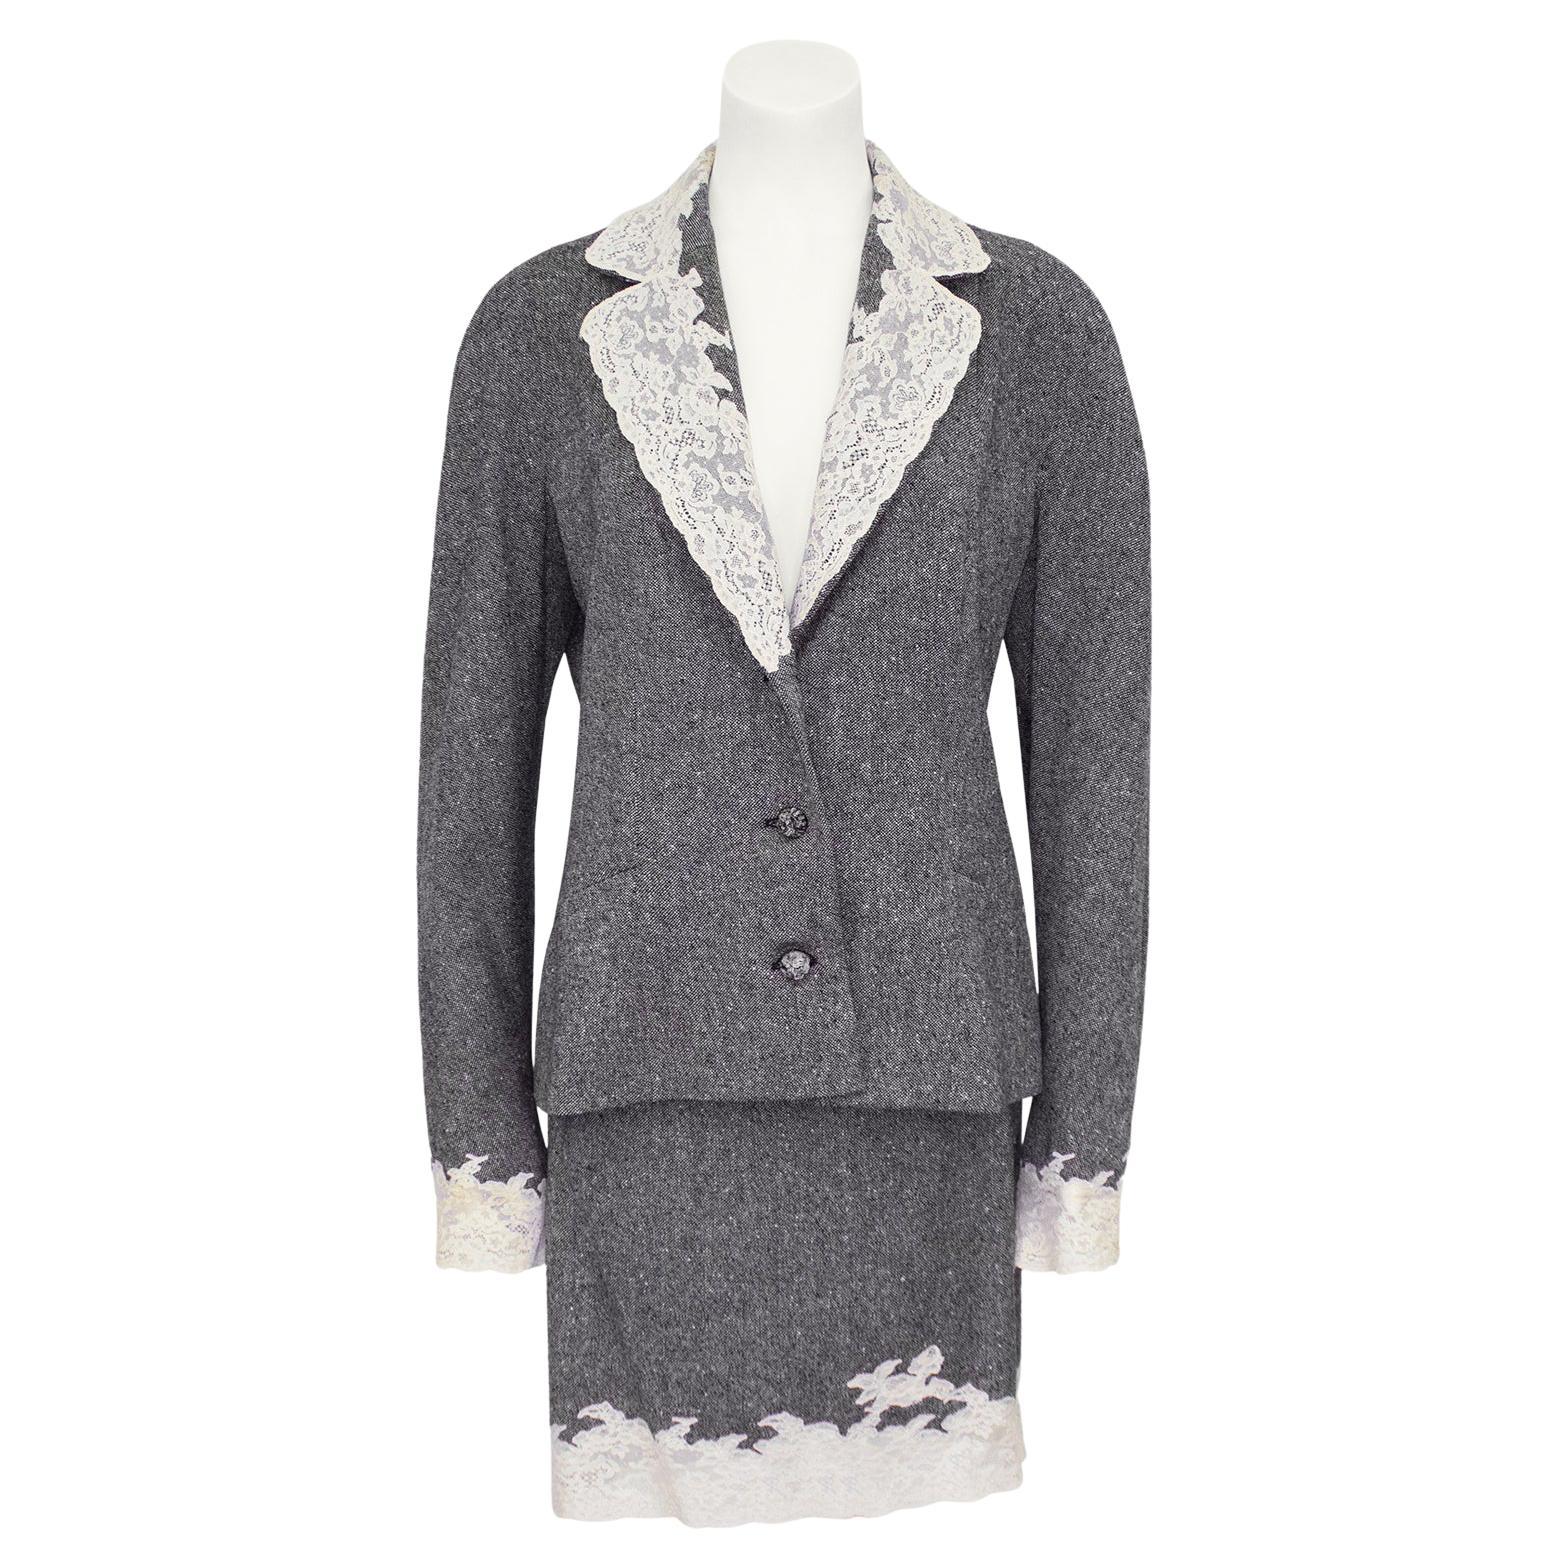 Fall/Winter 1998 Christian Dior Grey Wool Tweed Skirt Suit with Cream Lace  For Sale